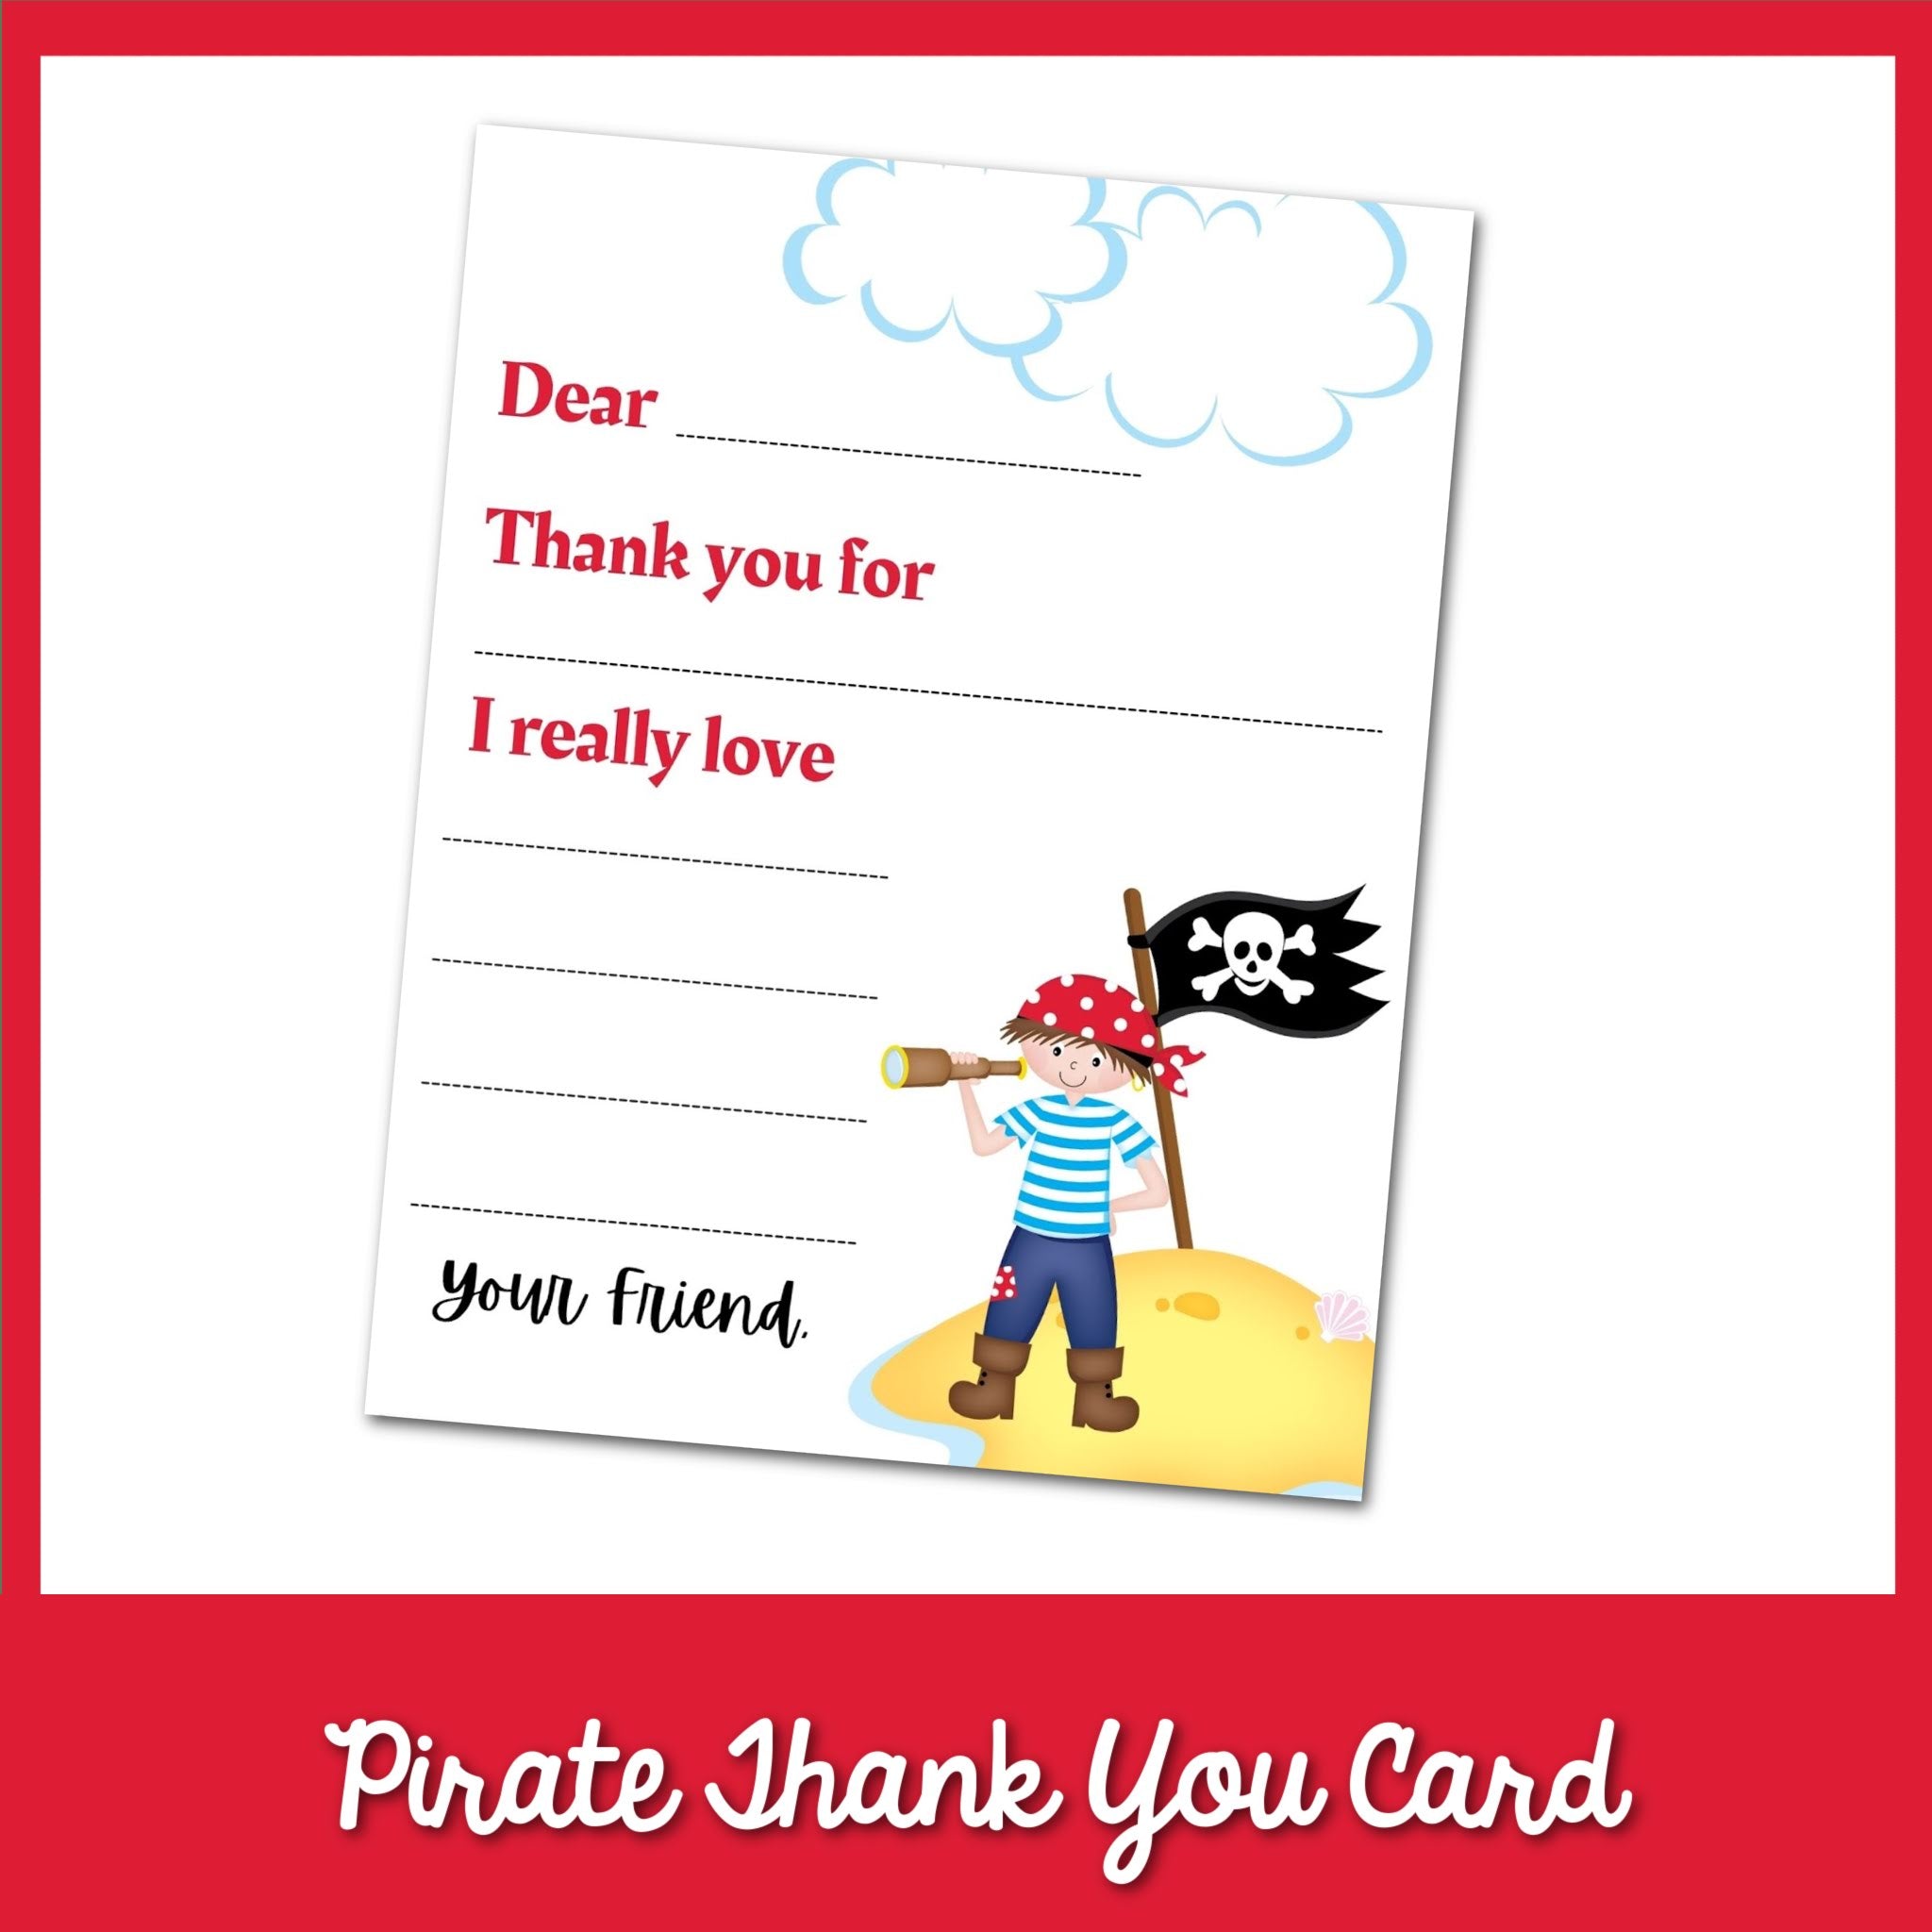 Pirate Thank you card